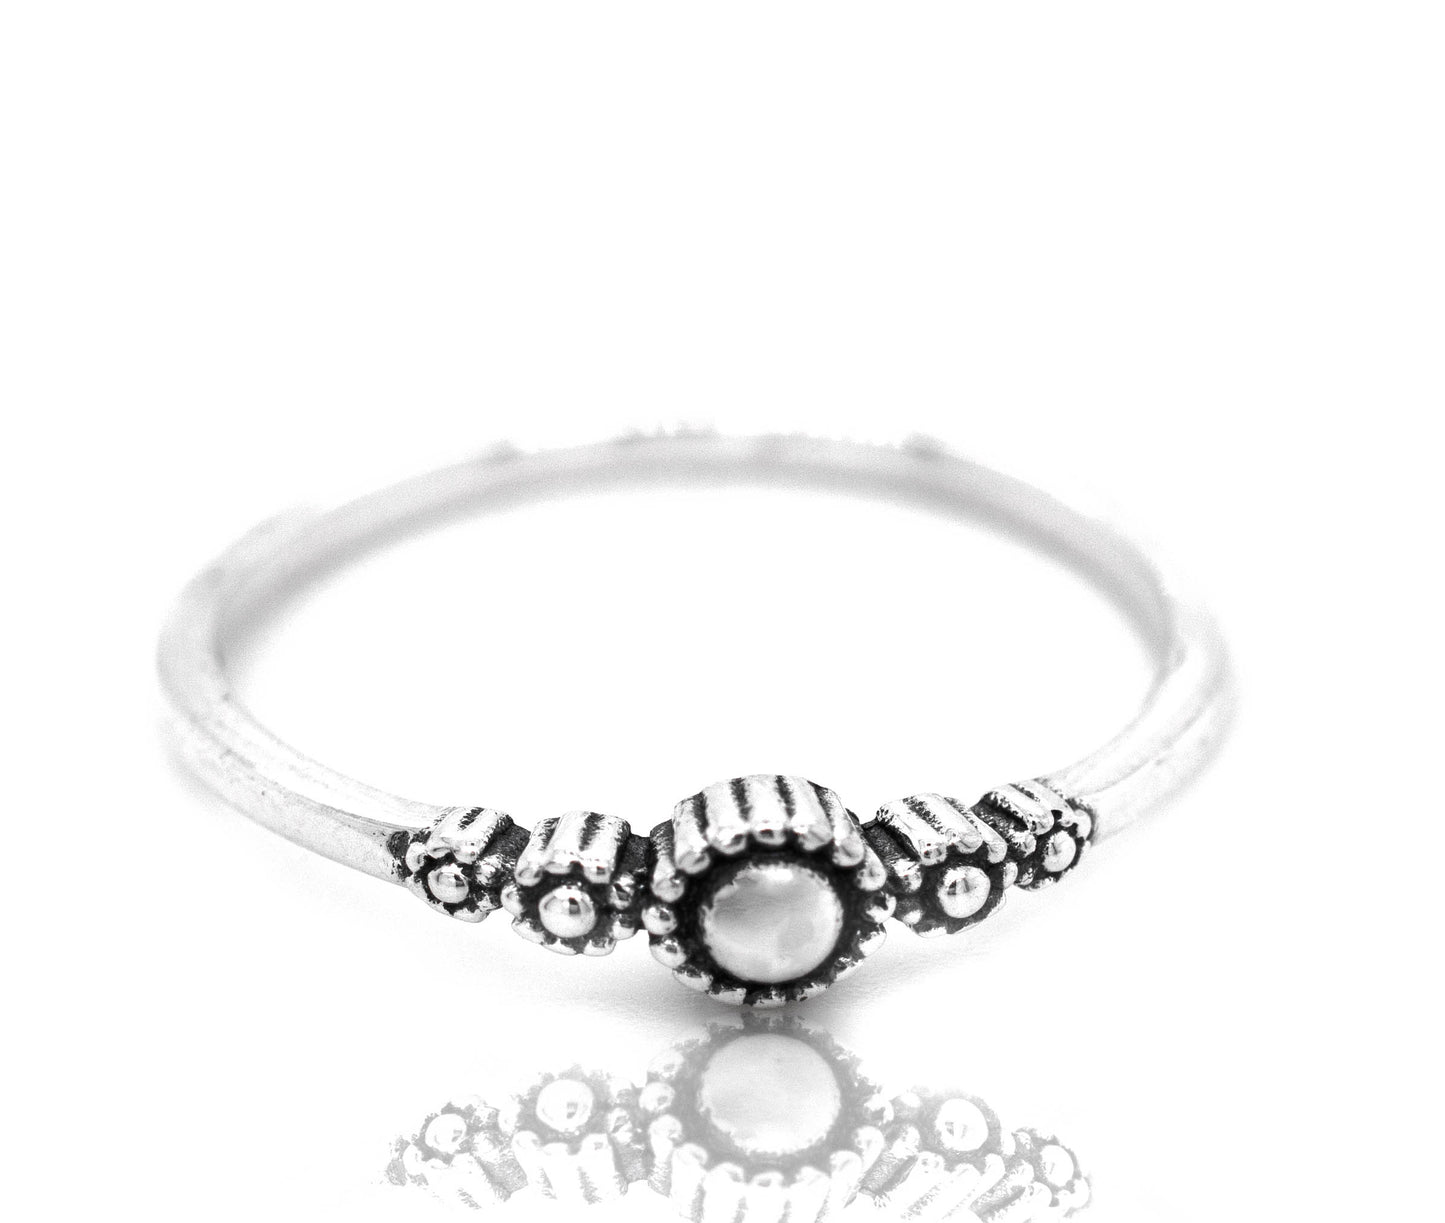 A Tiny Beaded Princess Ring crafted from .925 Sterling Silver, adorned with lustrous pearls by Super Silver.